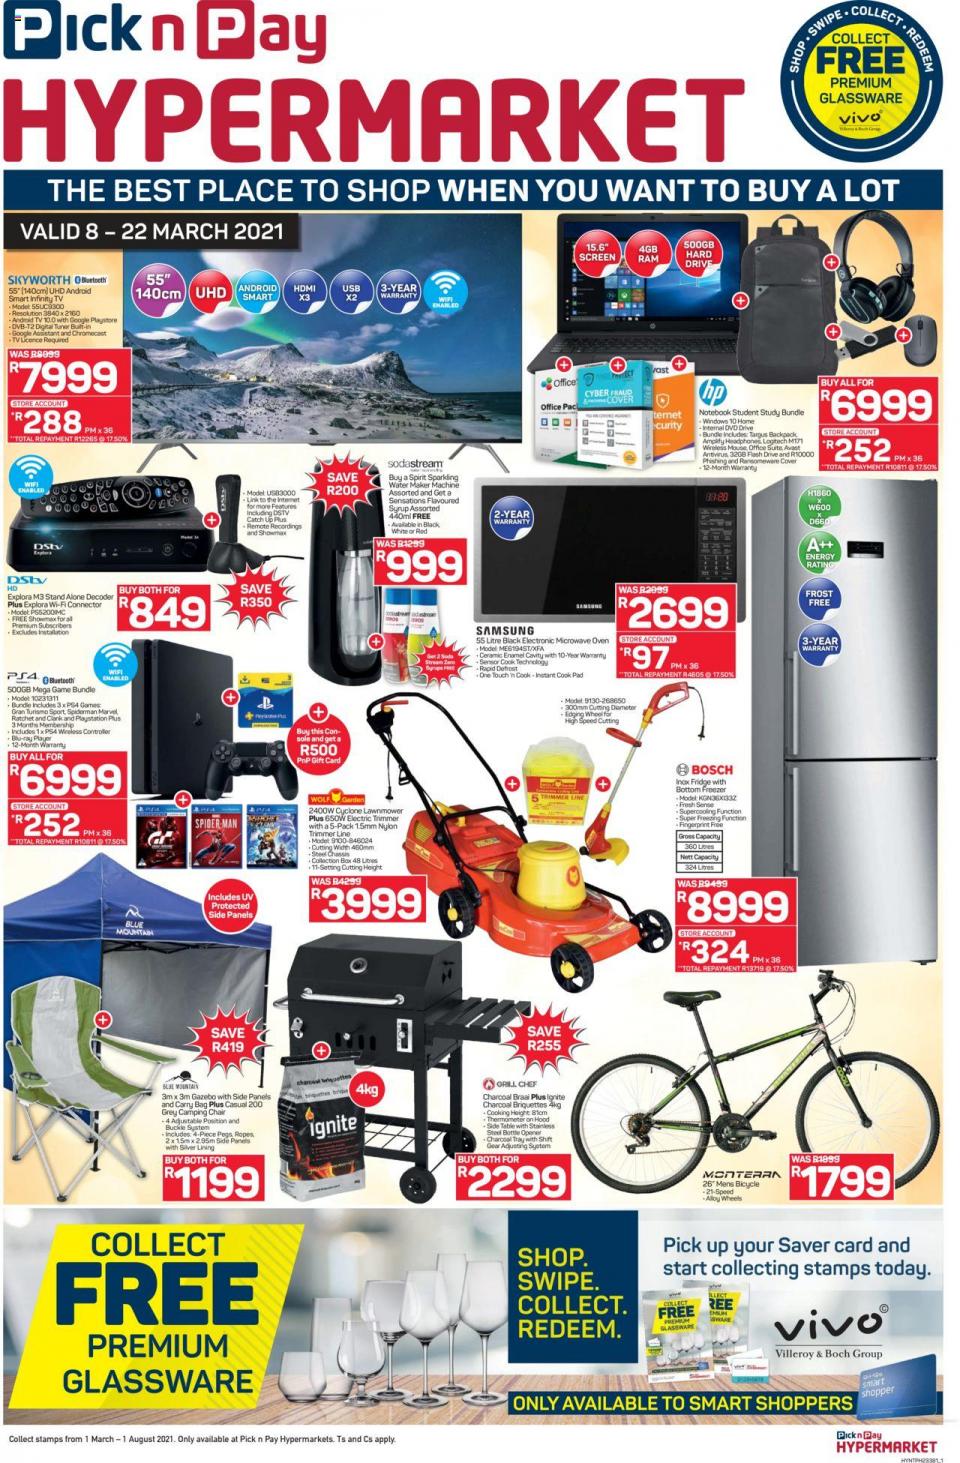 Pick n Pay Specials Hypermarket 8 March 2021